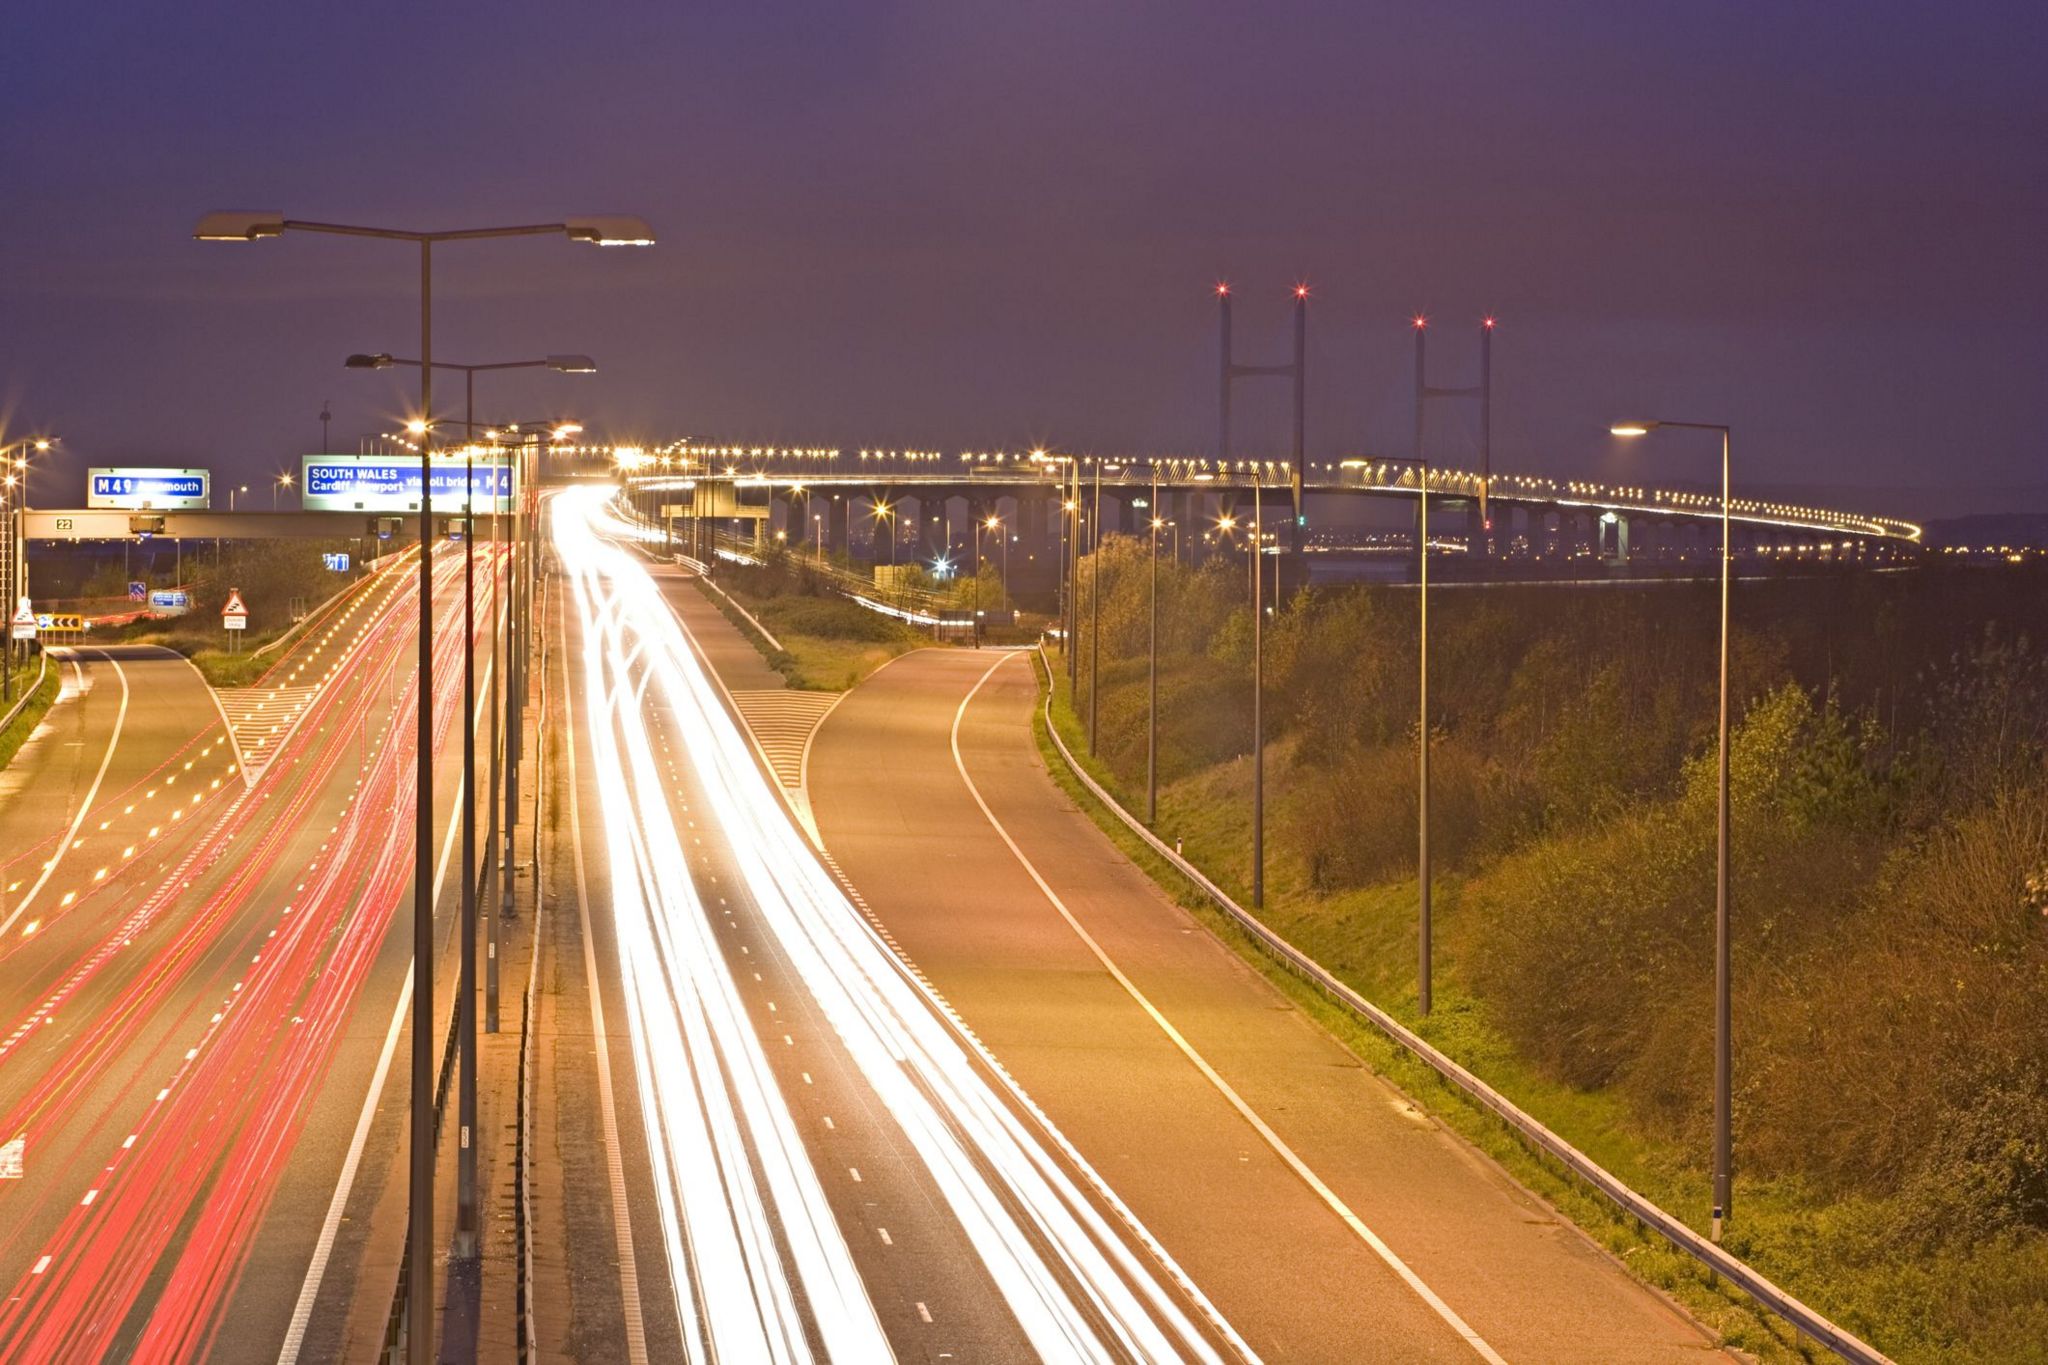 A picture of the second Severn Bridge at night